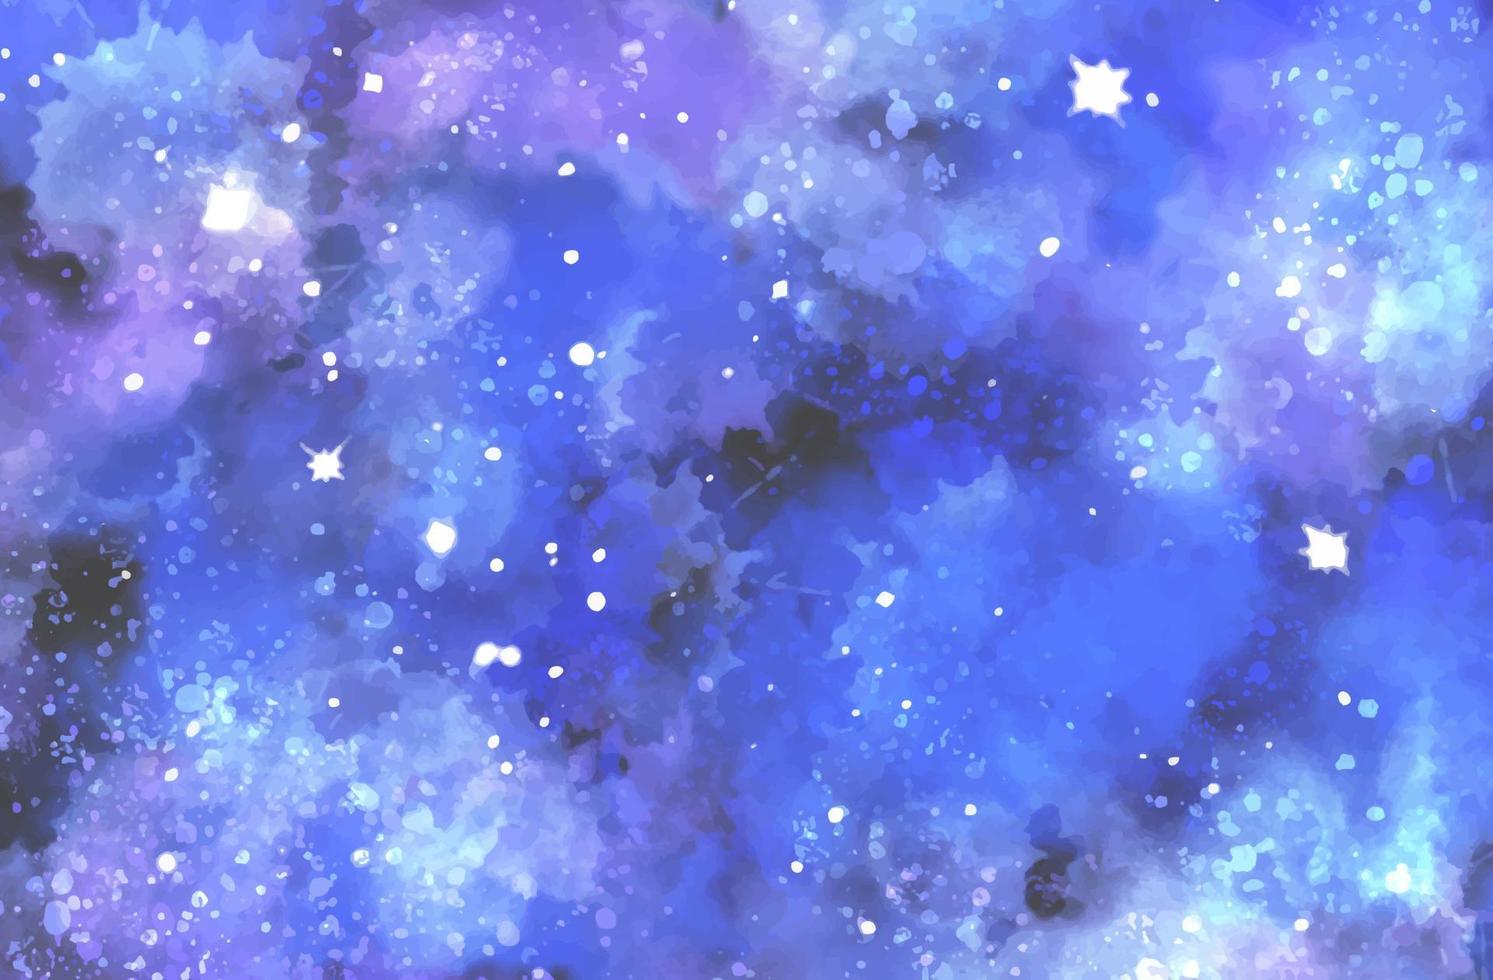 Hand painted watercolor cosmic texture with stars. Space, starry night sky, galaxy vector illustration.